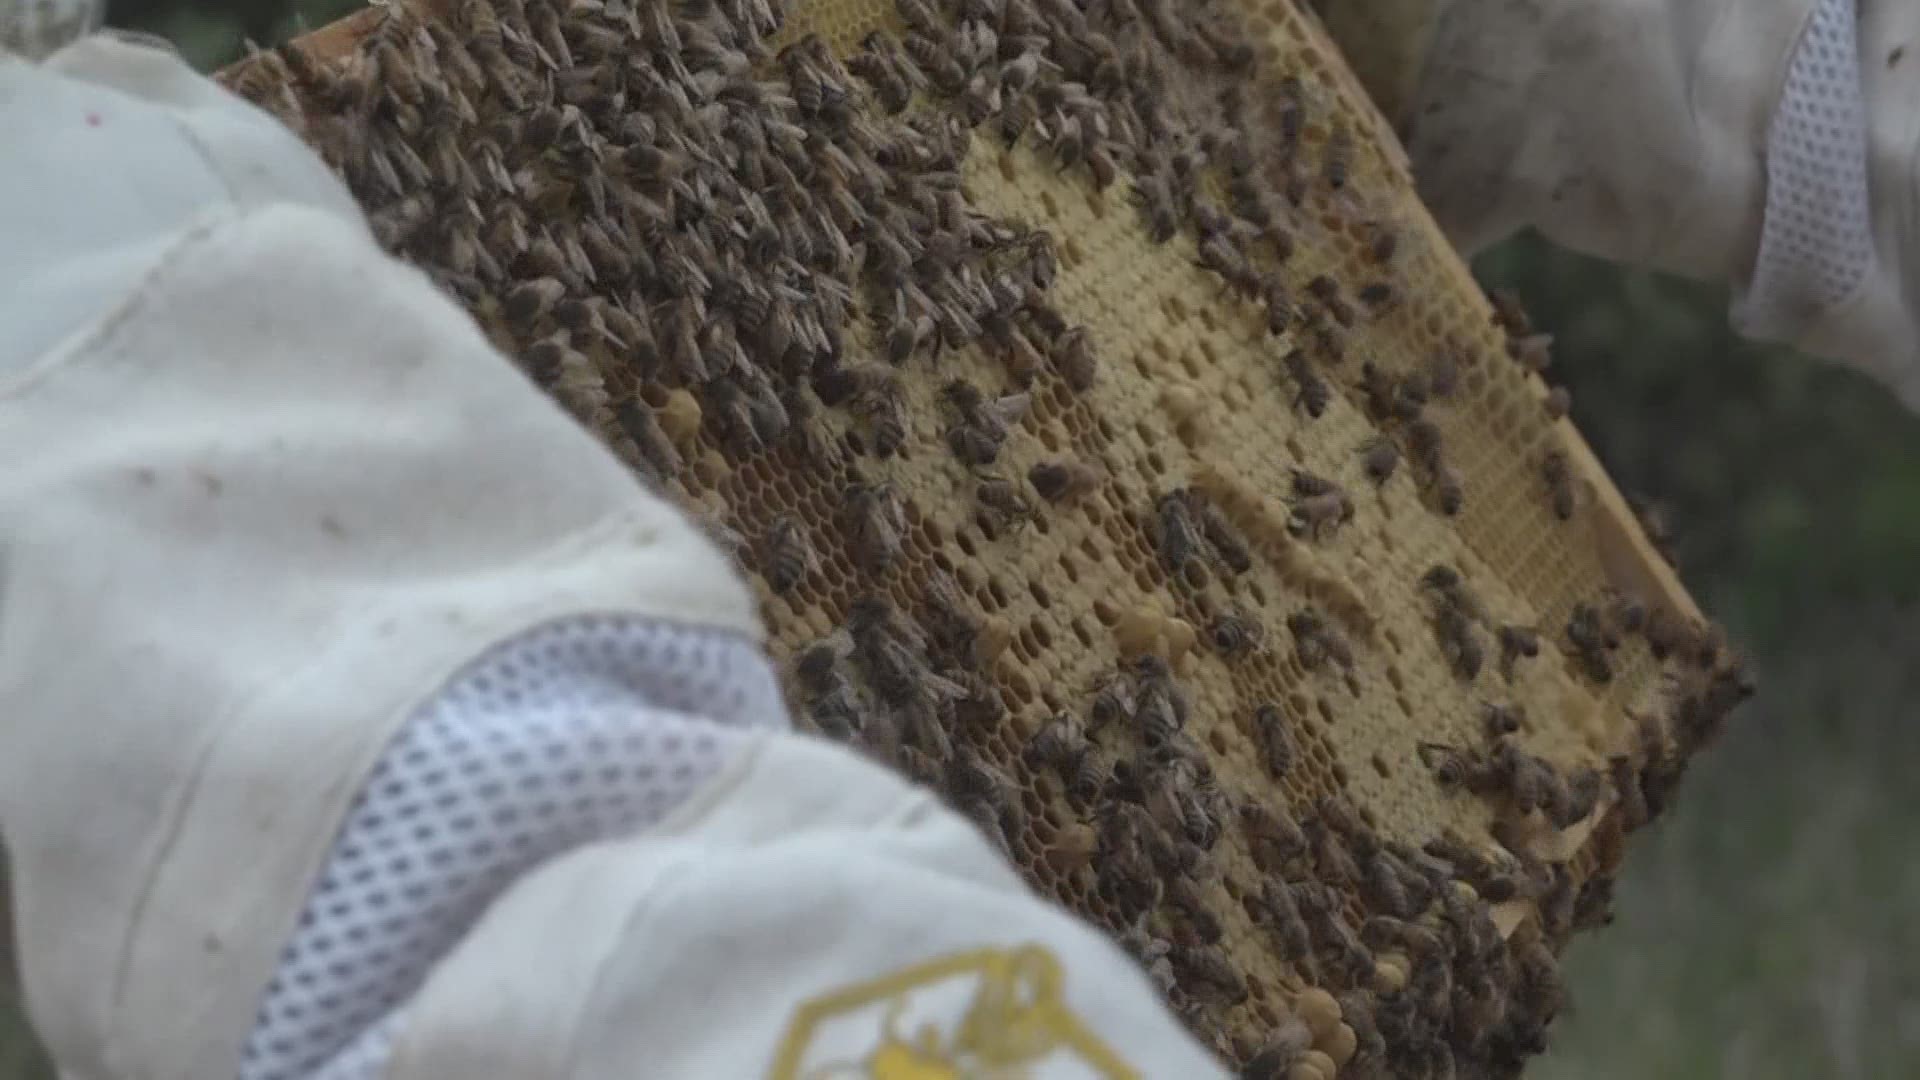 He urges people to make the call to a beekeeper who can relocate the bees instead of killing them.